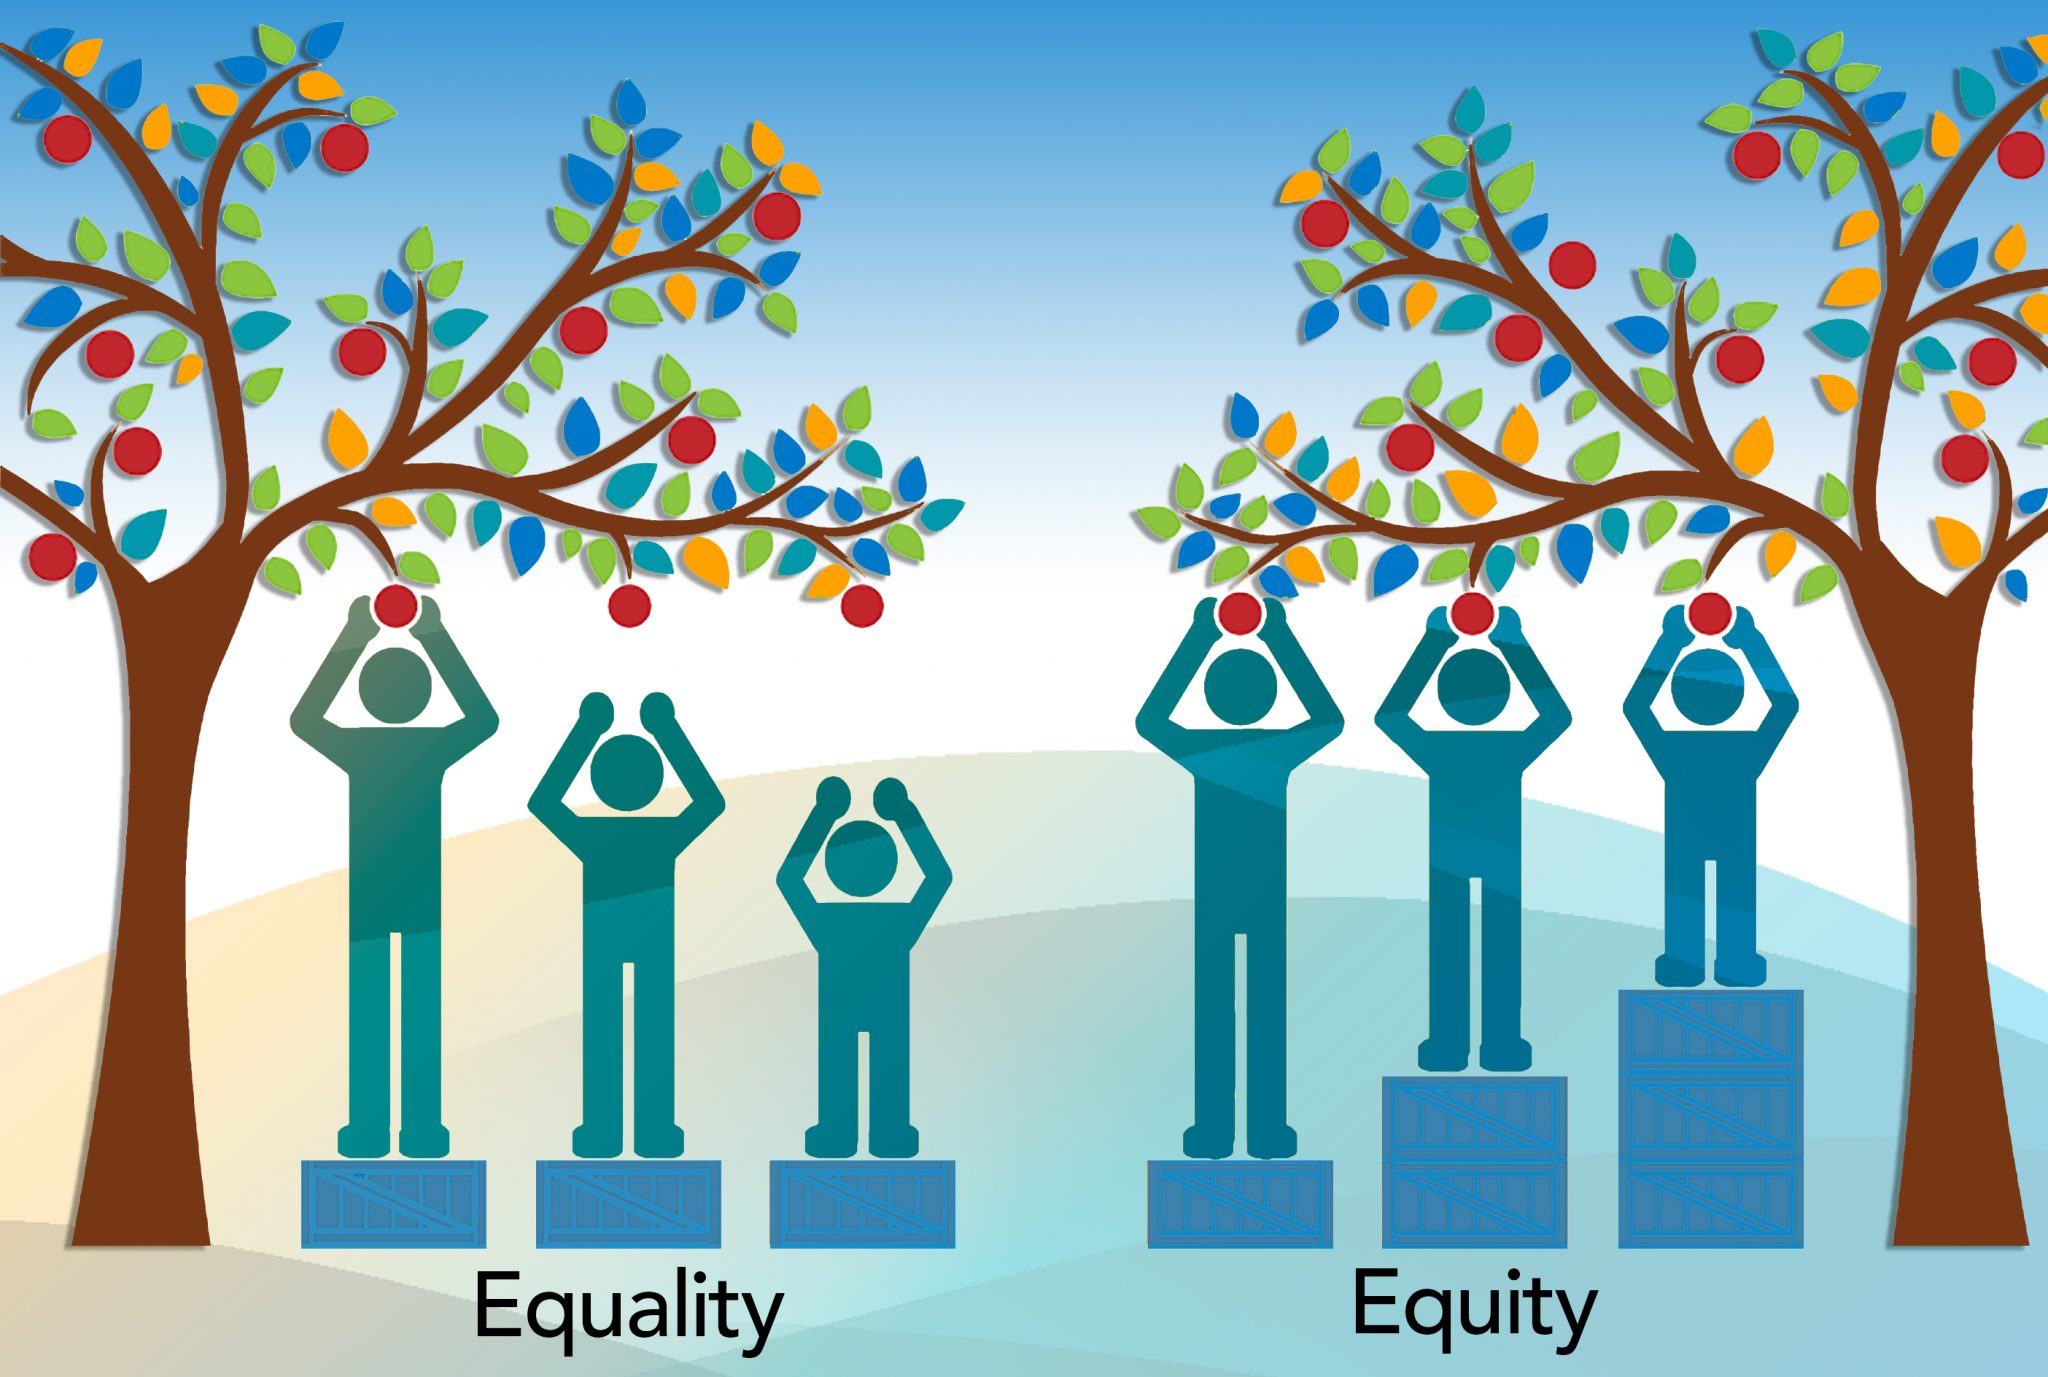 An image showing difference between equality vs equity. On the left three different heighted people are trying to reach apples on a tree but only the tall one can reach it. On the right hand side the same three people are all standing on different sized boxes that allow them all to reach the apples